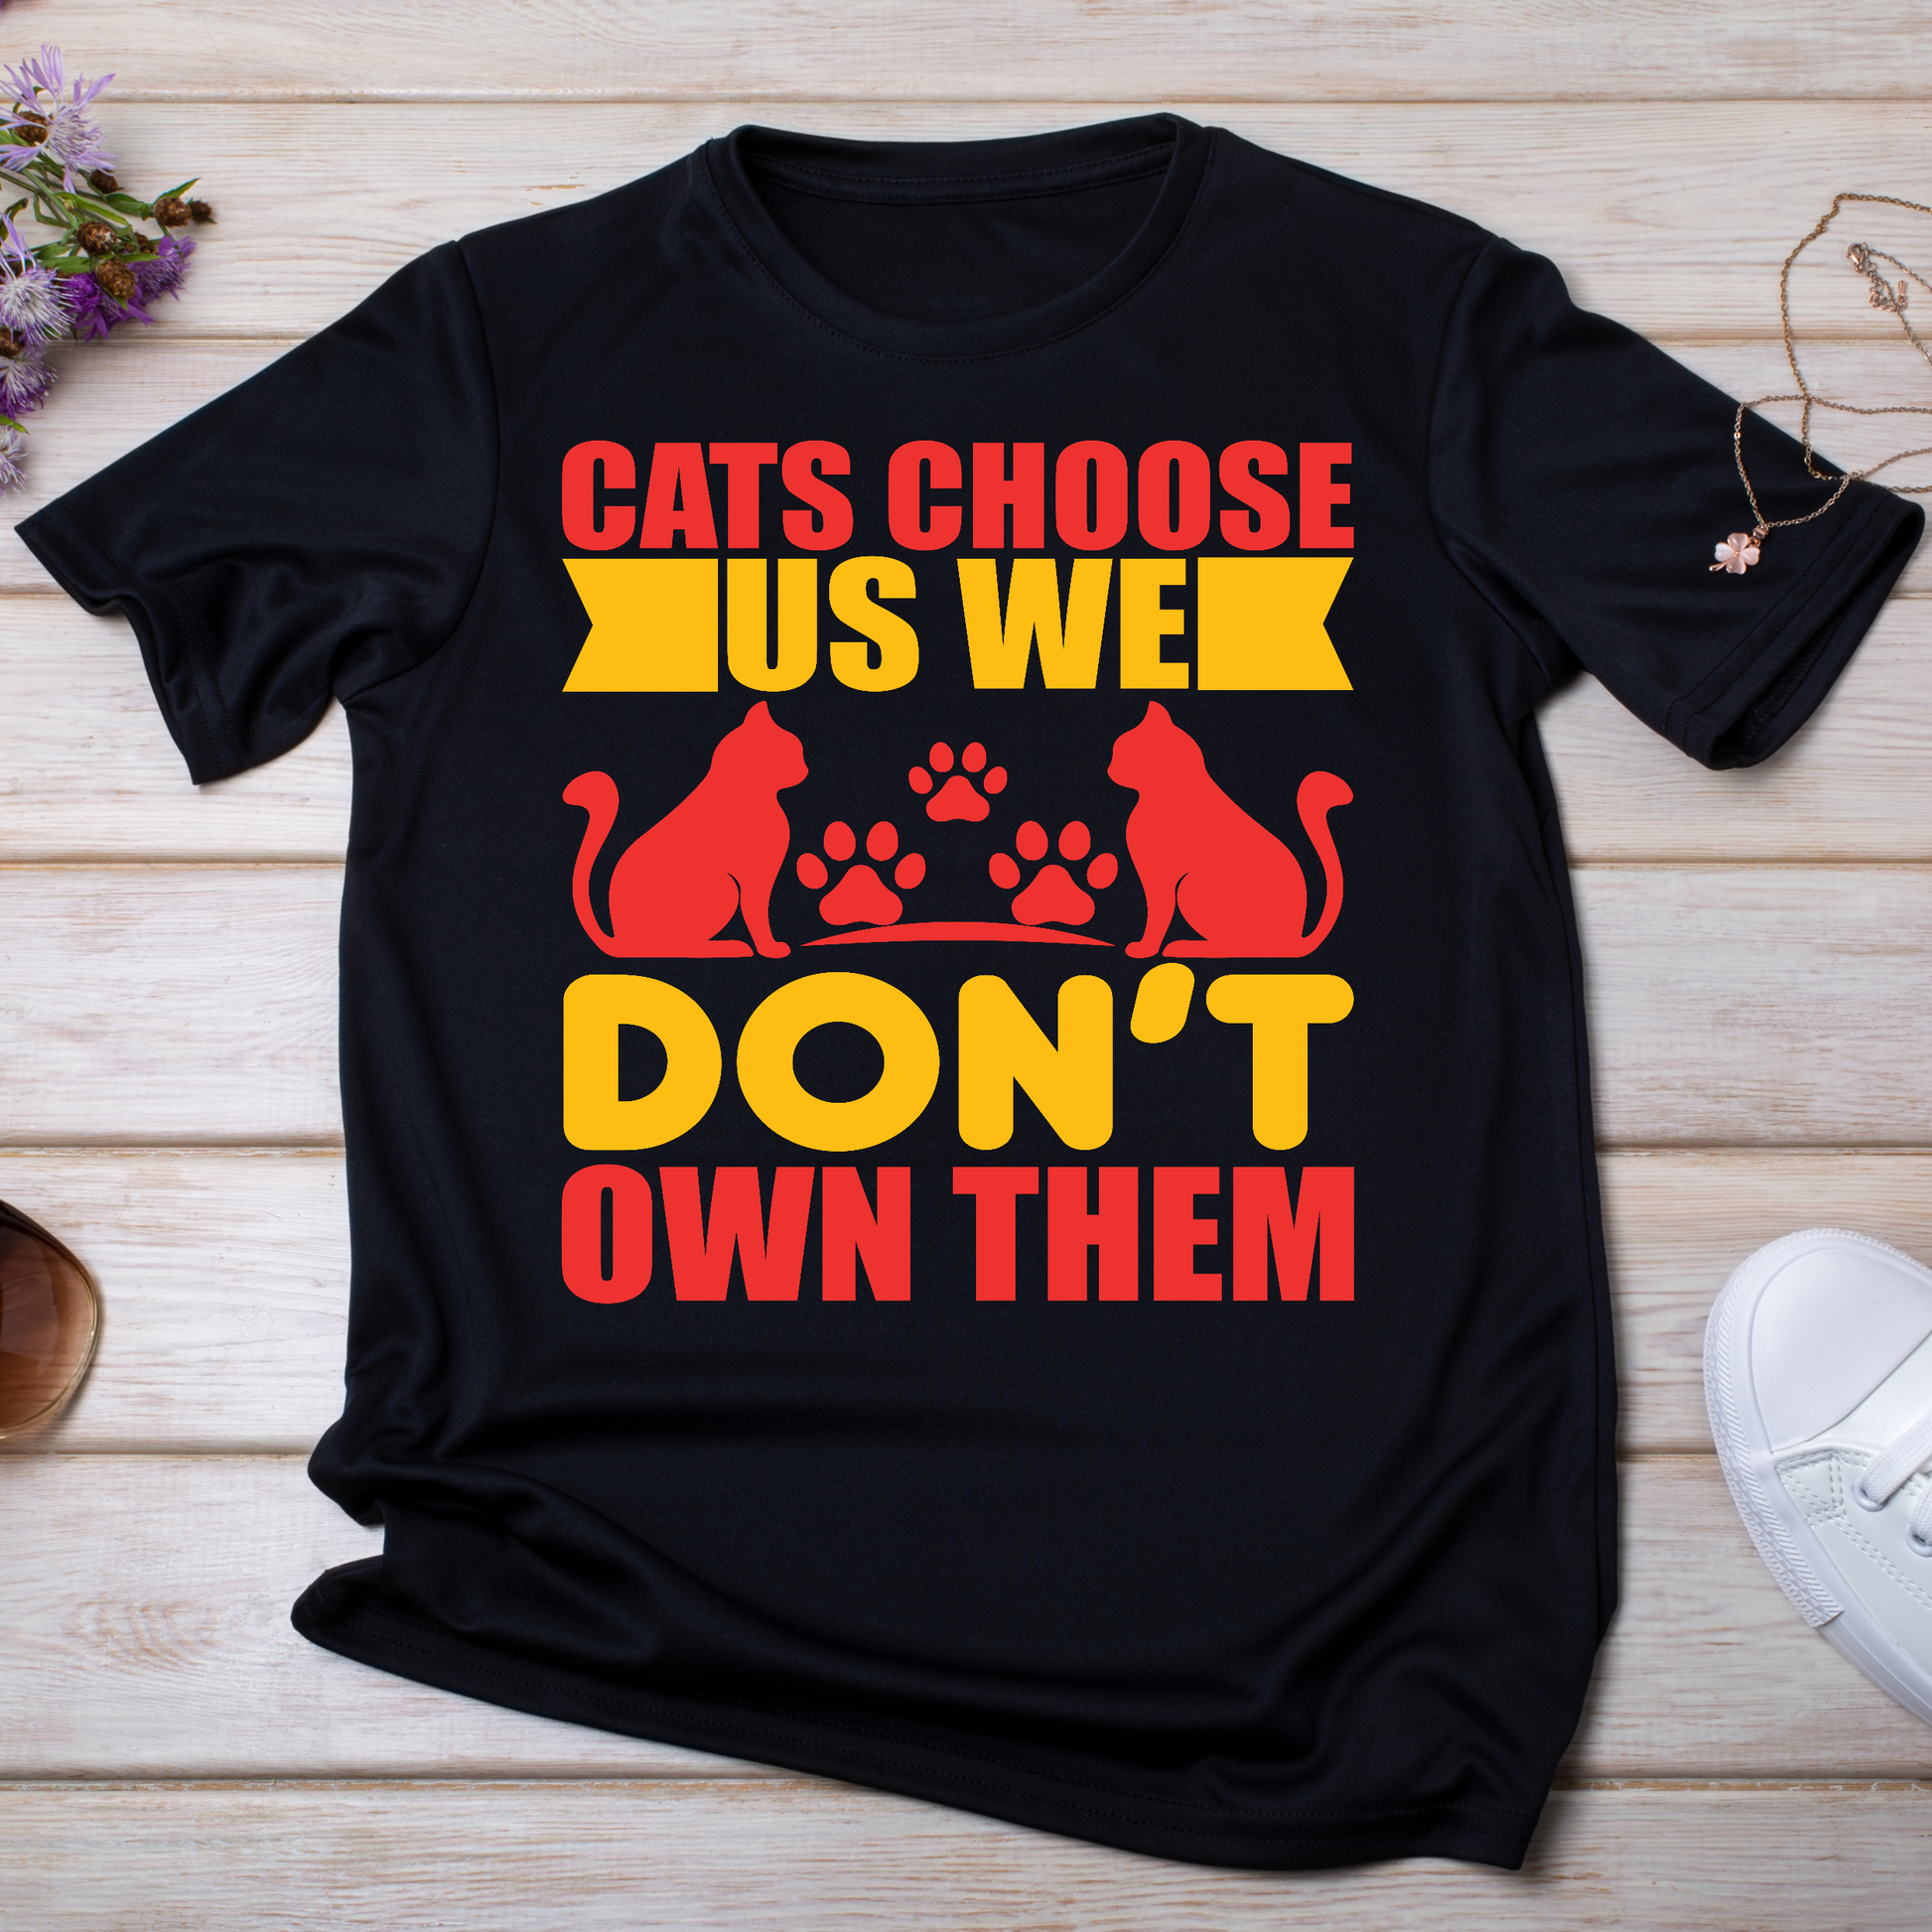 Cats choose us we don't own them Women's cat t-shirt - Premium t-shirt from Lees Krazy Teez - Just $19.95! Shop now at Lees Krazy Teez